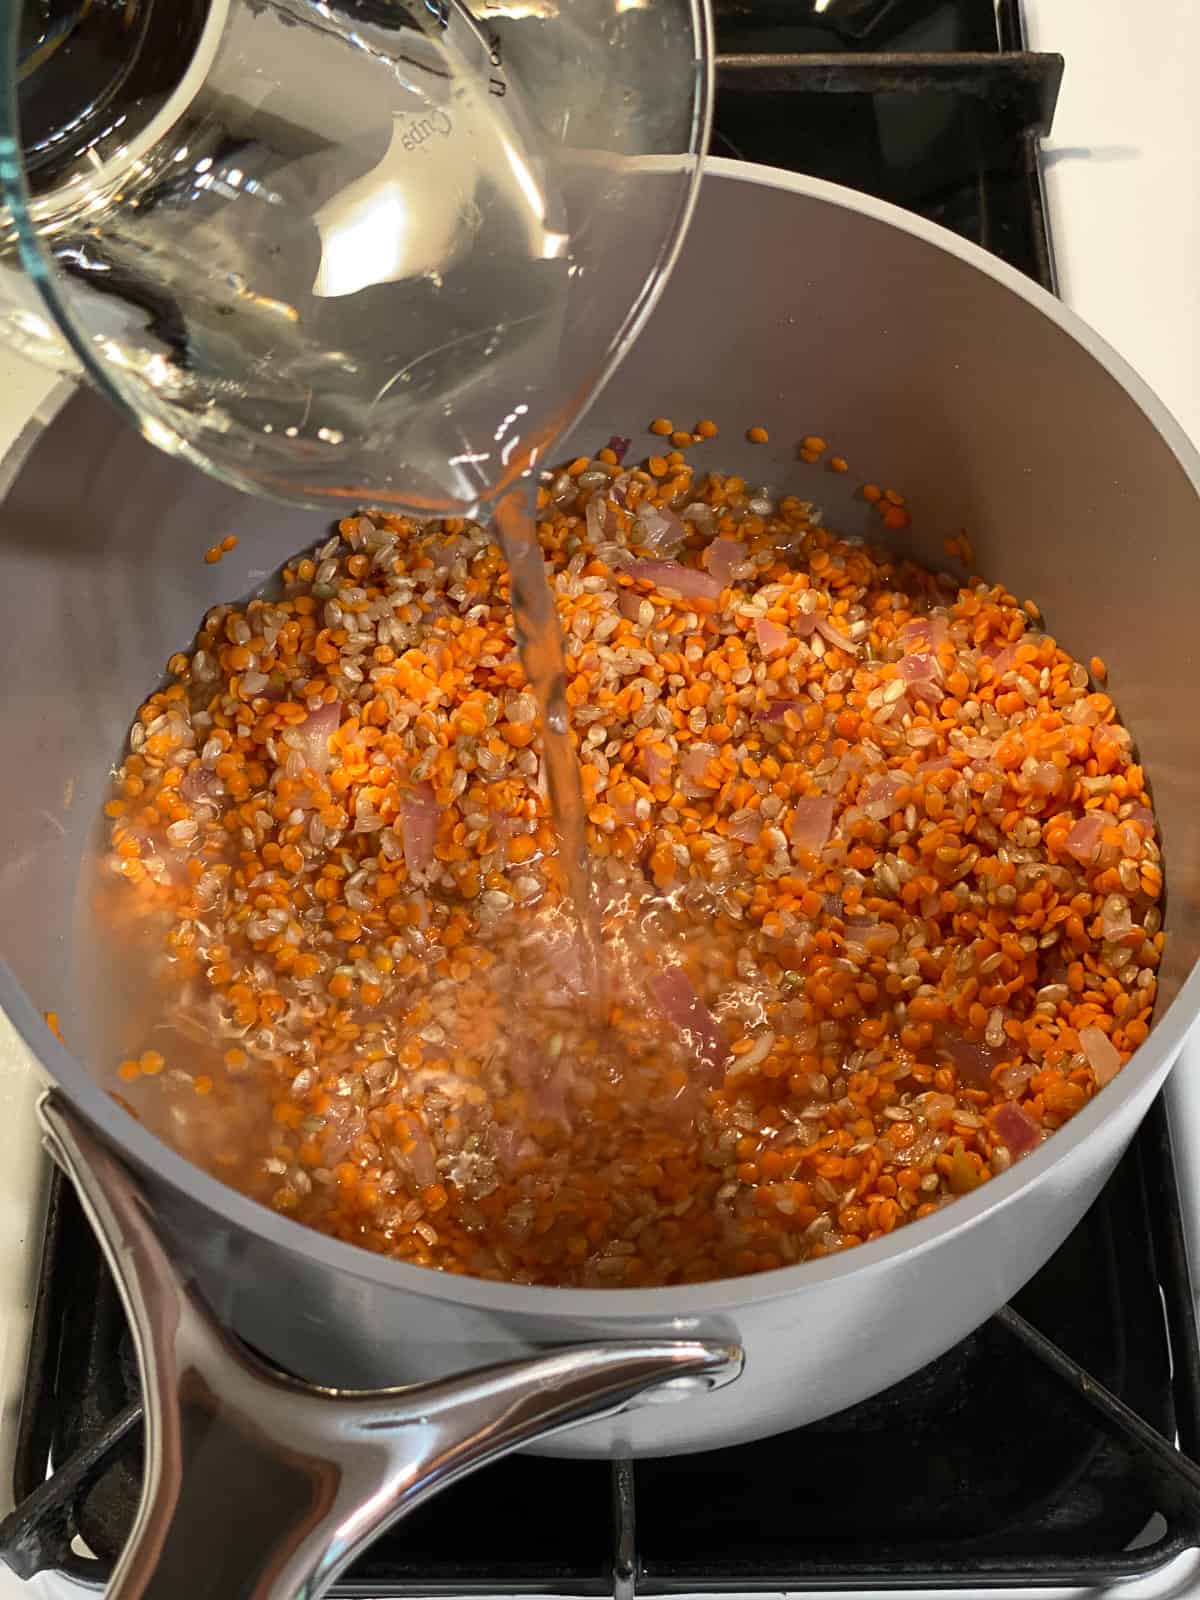 Process of adding water to the pot